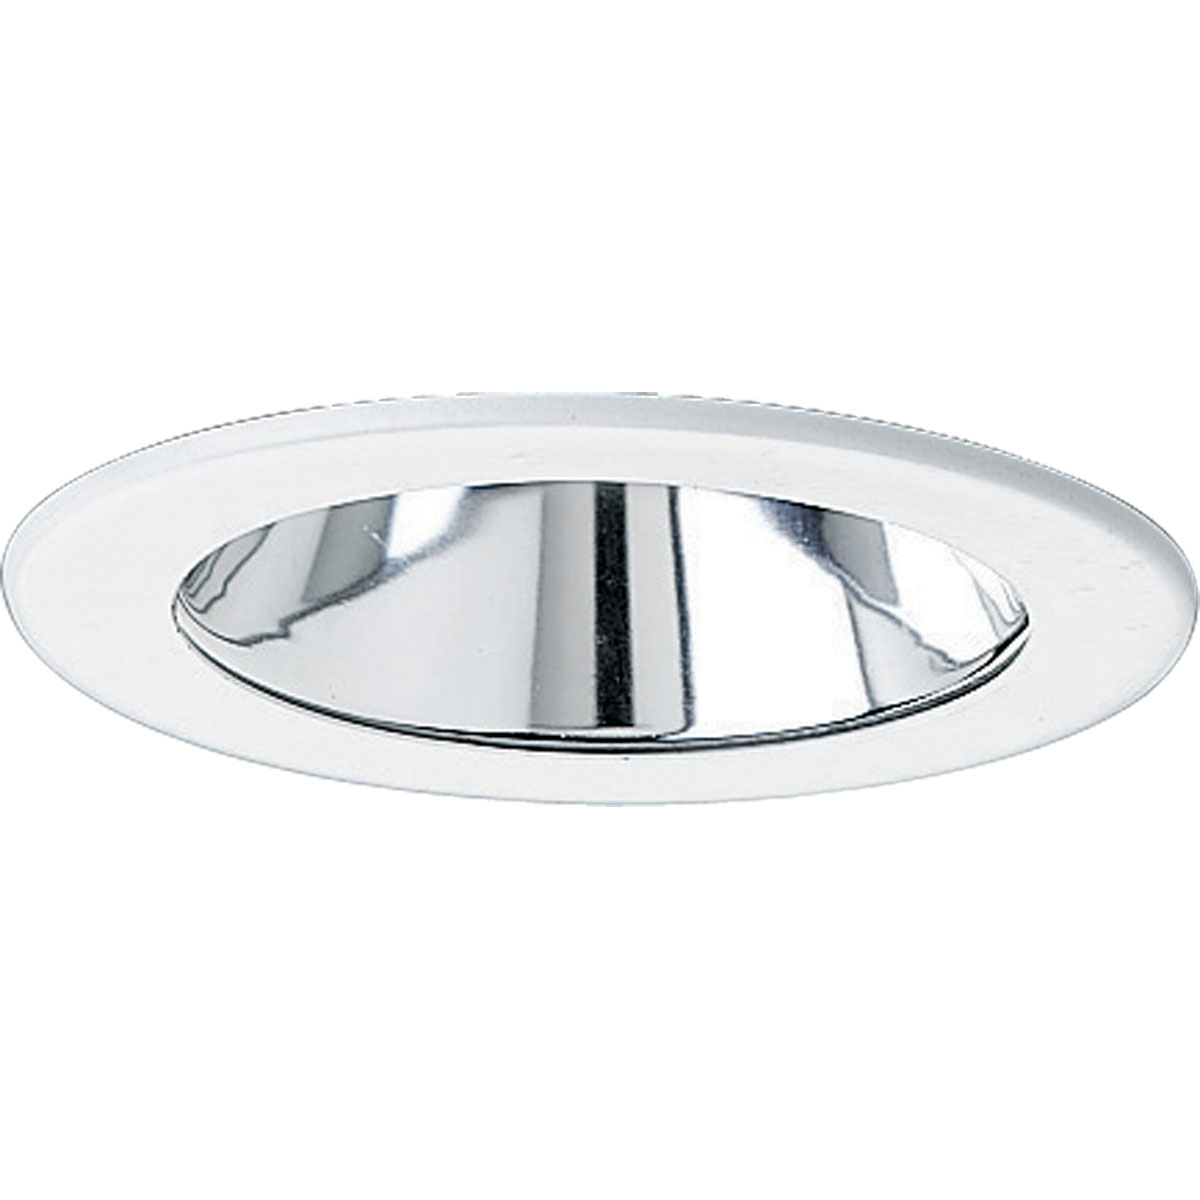 4 in Specular Clear Alzak Cone trim with bright white powdered painted metal flange.